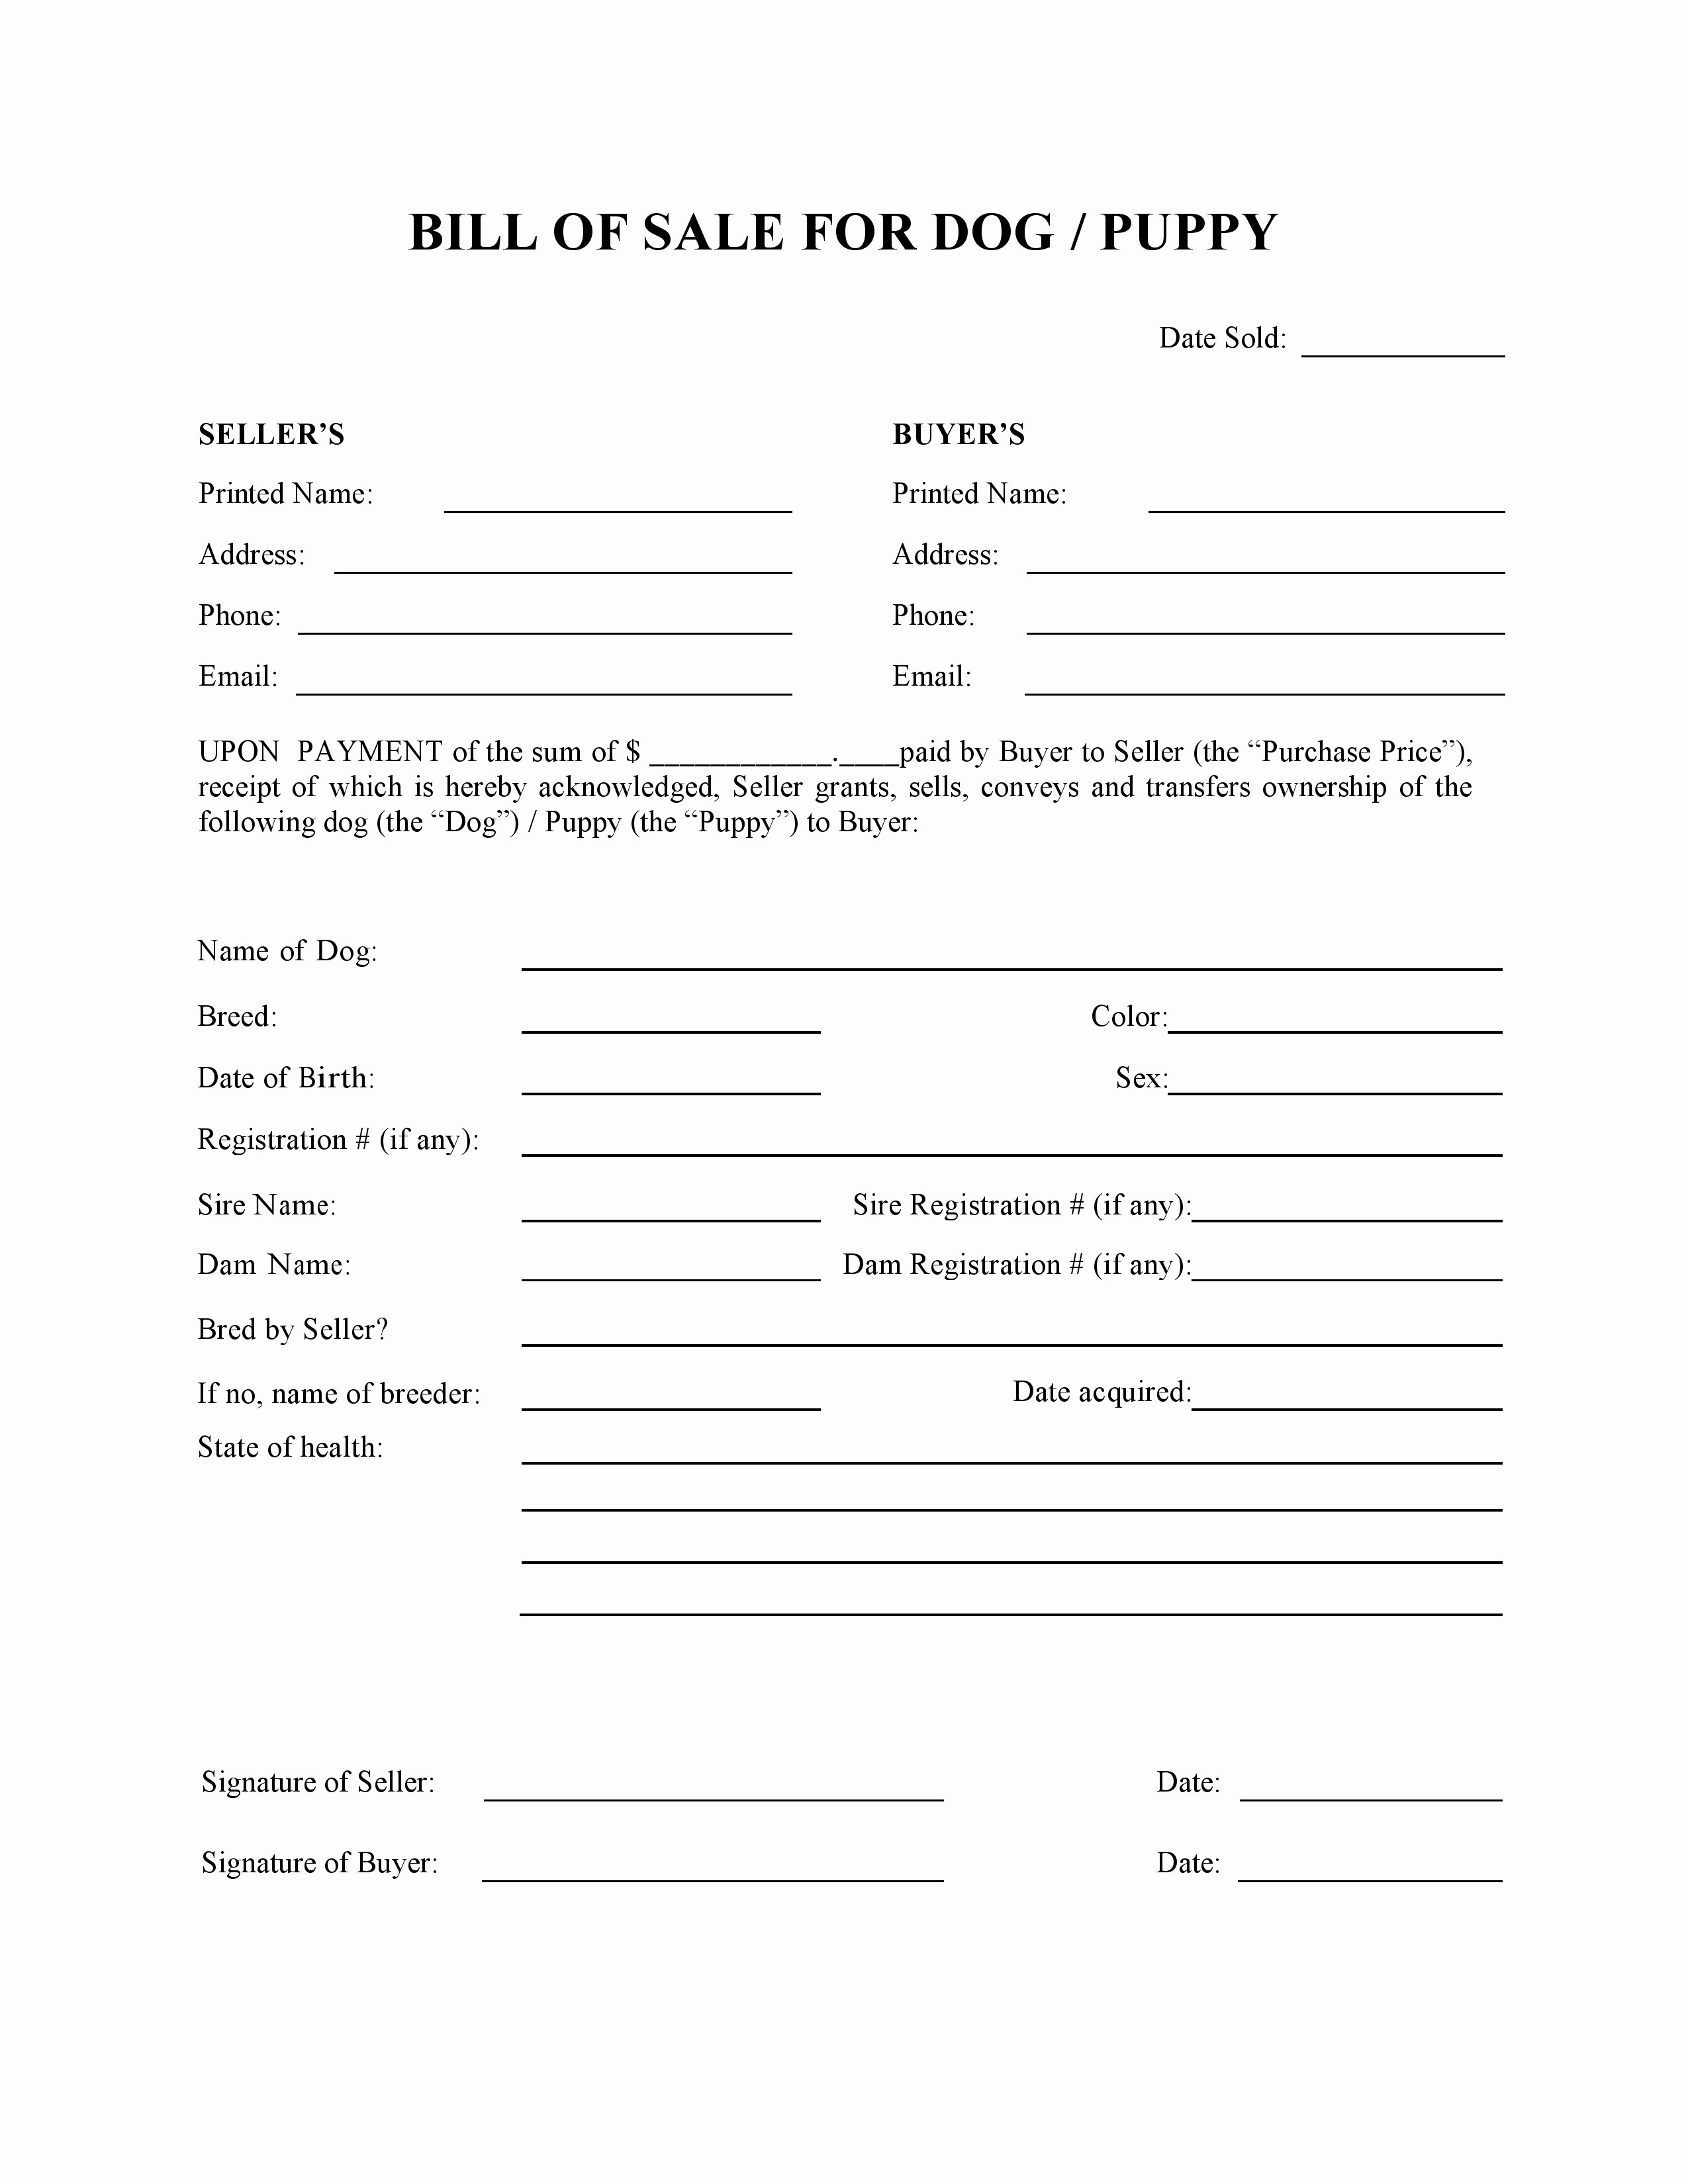 Puppy Sales Contract Template Luxury Free Dog or Puppy Bill Of Sale form Pdf Word